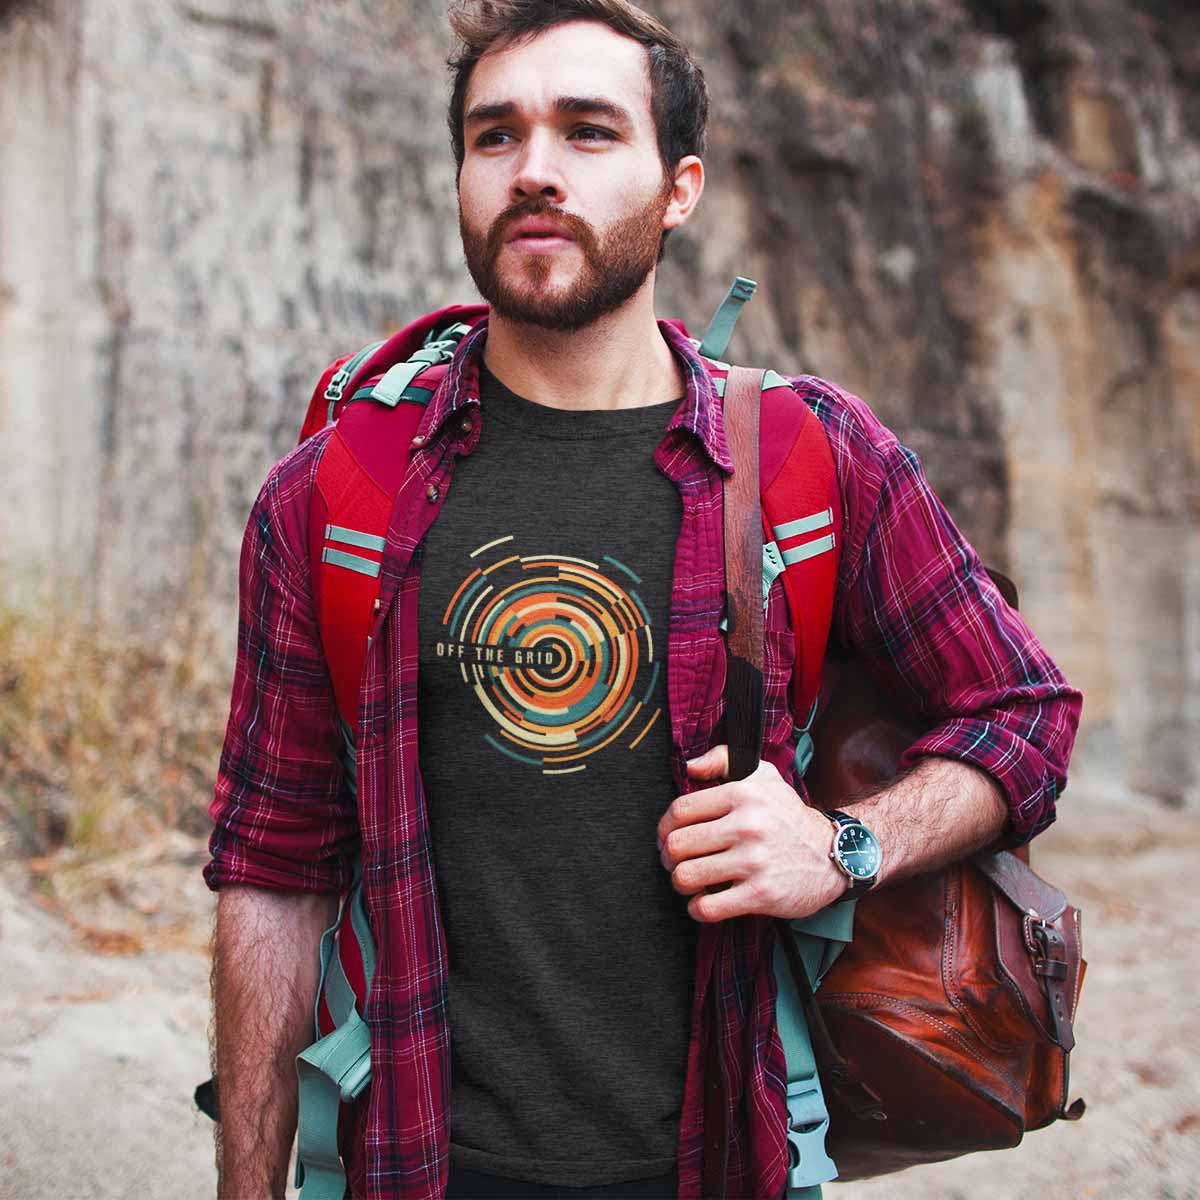 Off-the-grid-printed-t-shirt-for-men by Ghumakkad